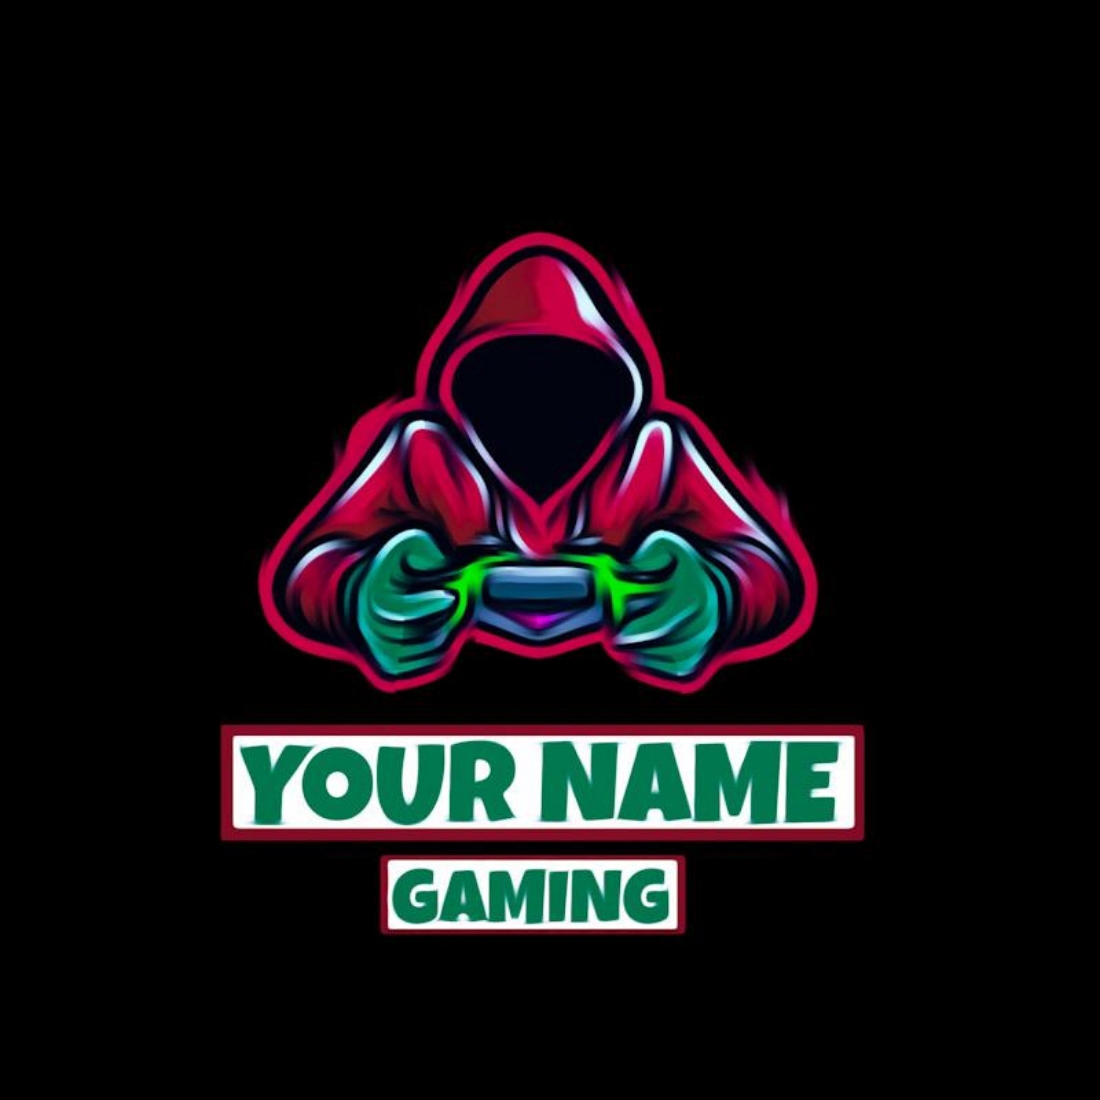 How To Use & Customize The Free Gaming Logos